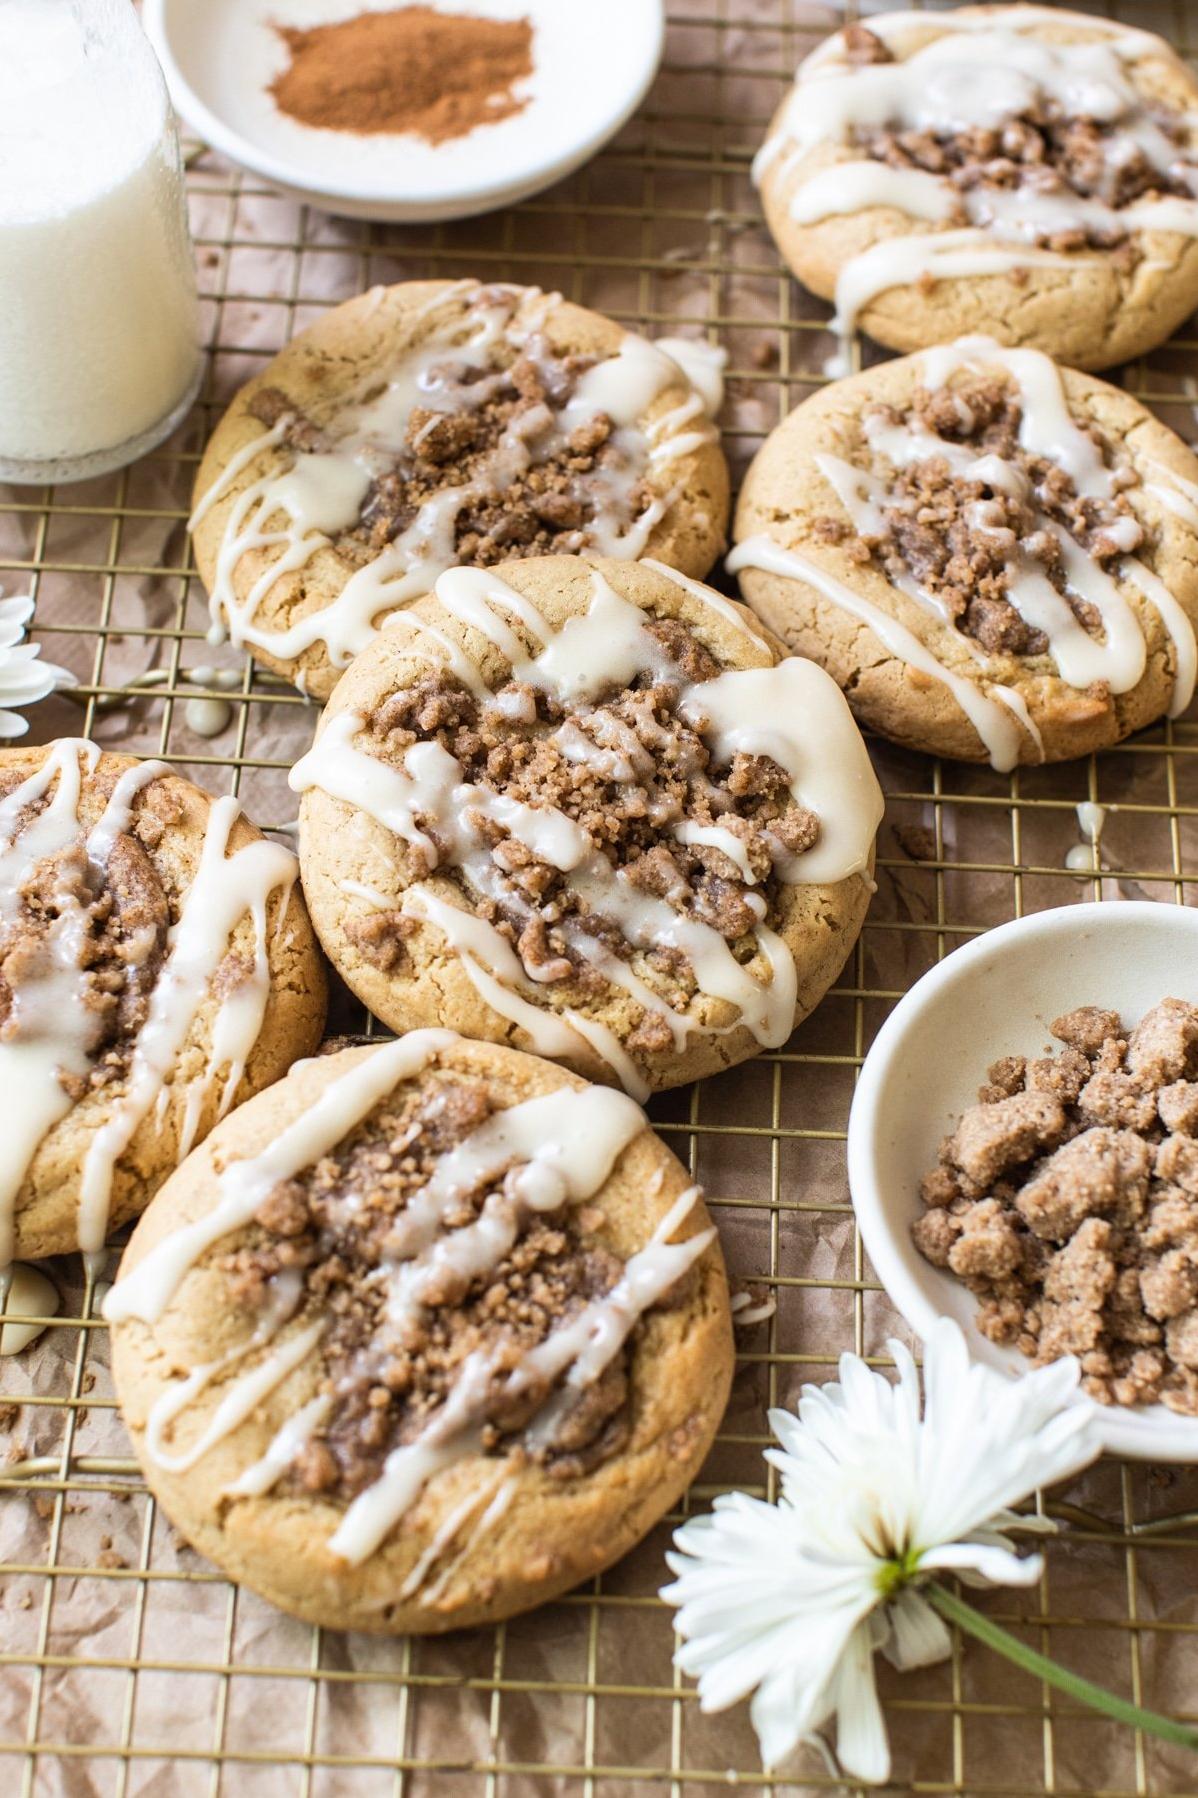  Say hello to your new favorite cookie: Coffee Cake Cookies.